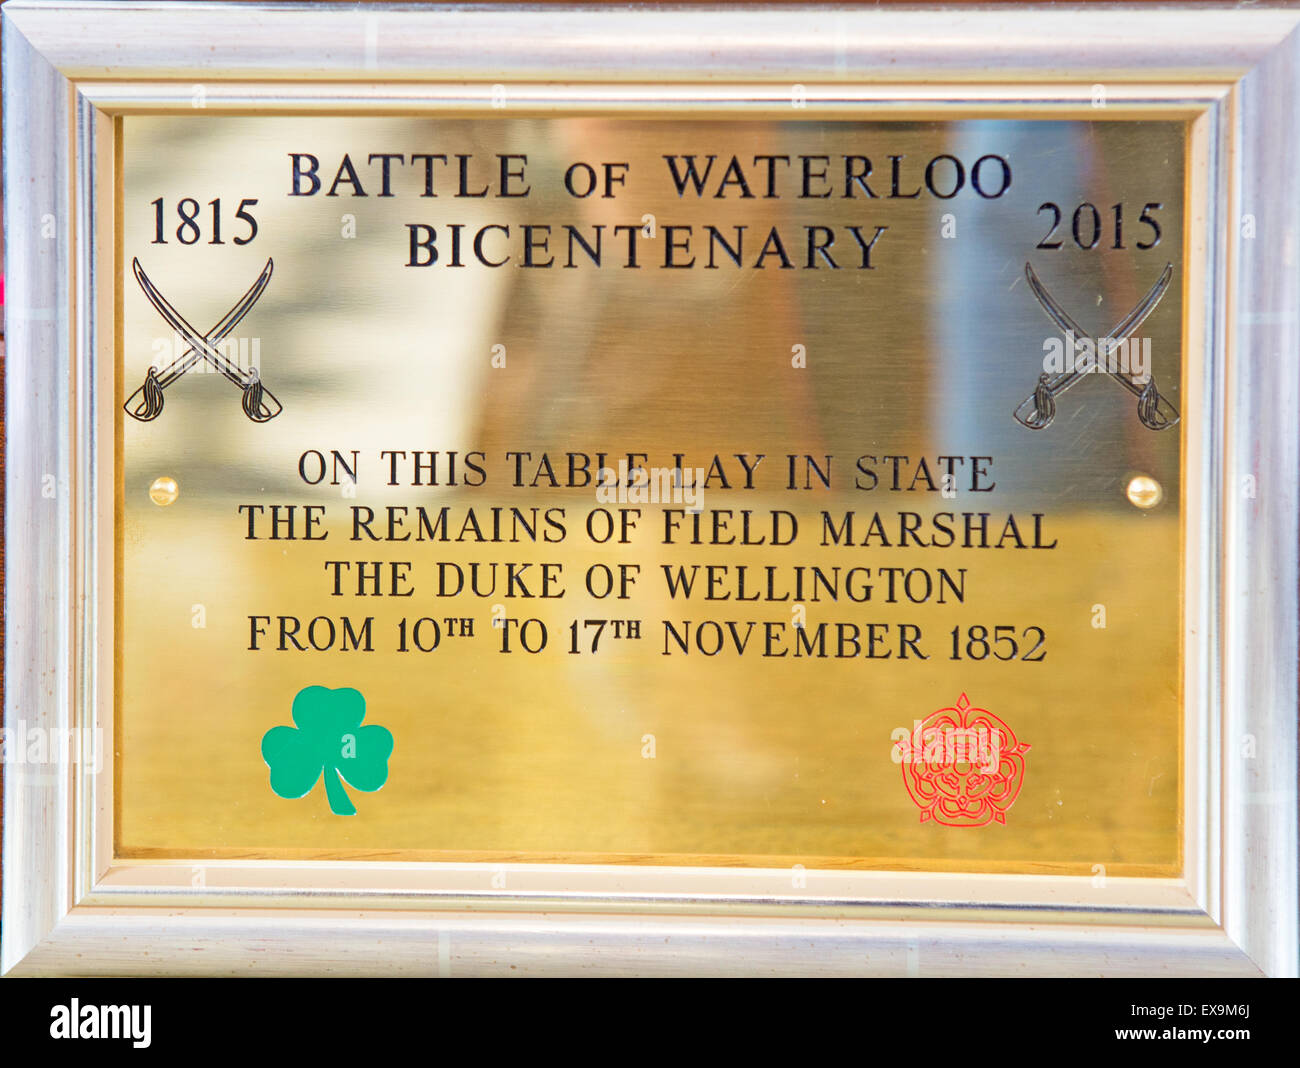 Dedication Plaque to Wellington and the 200th Bicentenary Battle of Waterloo Royal Hospital Chelsea London UK Stock Photo